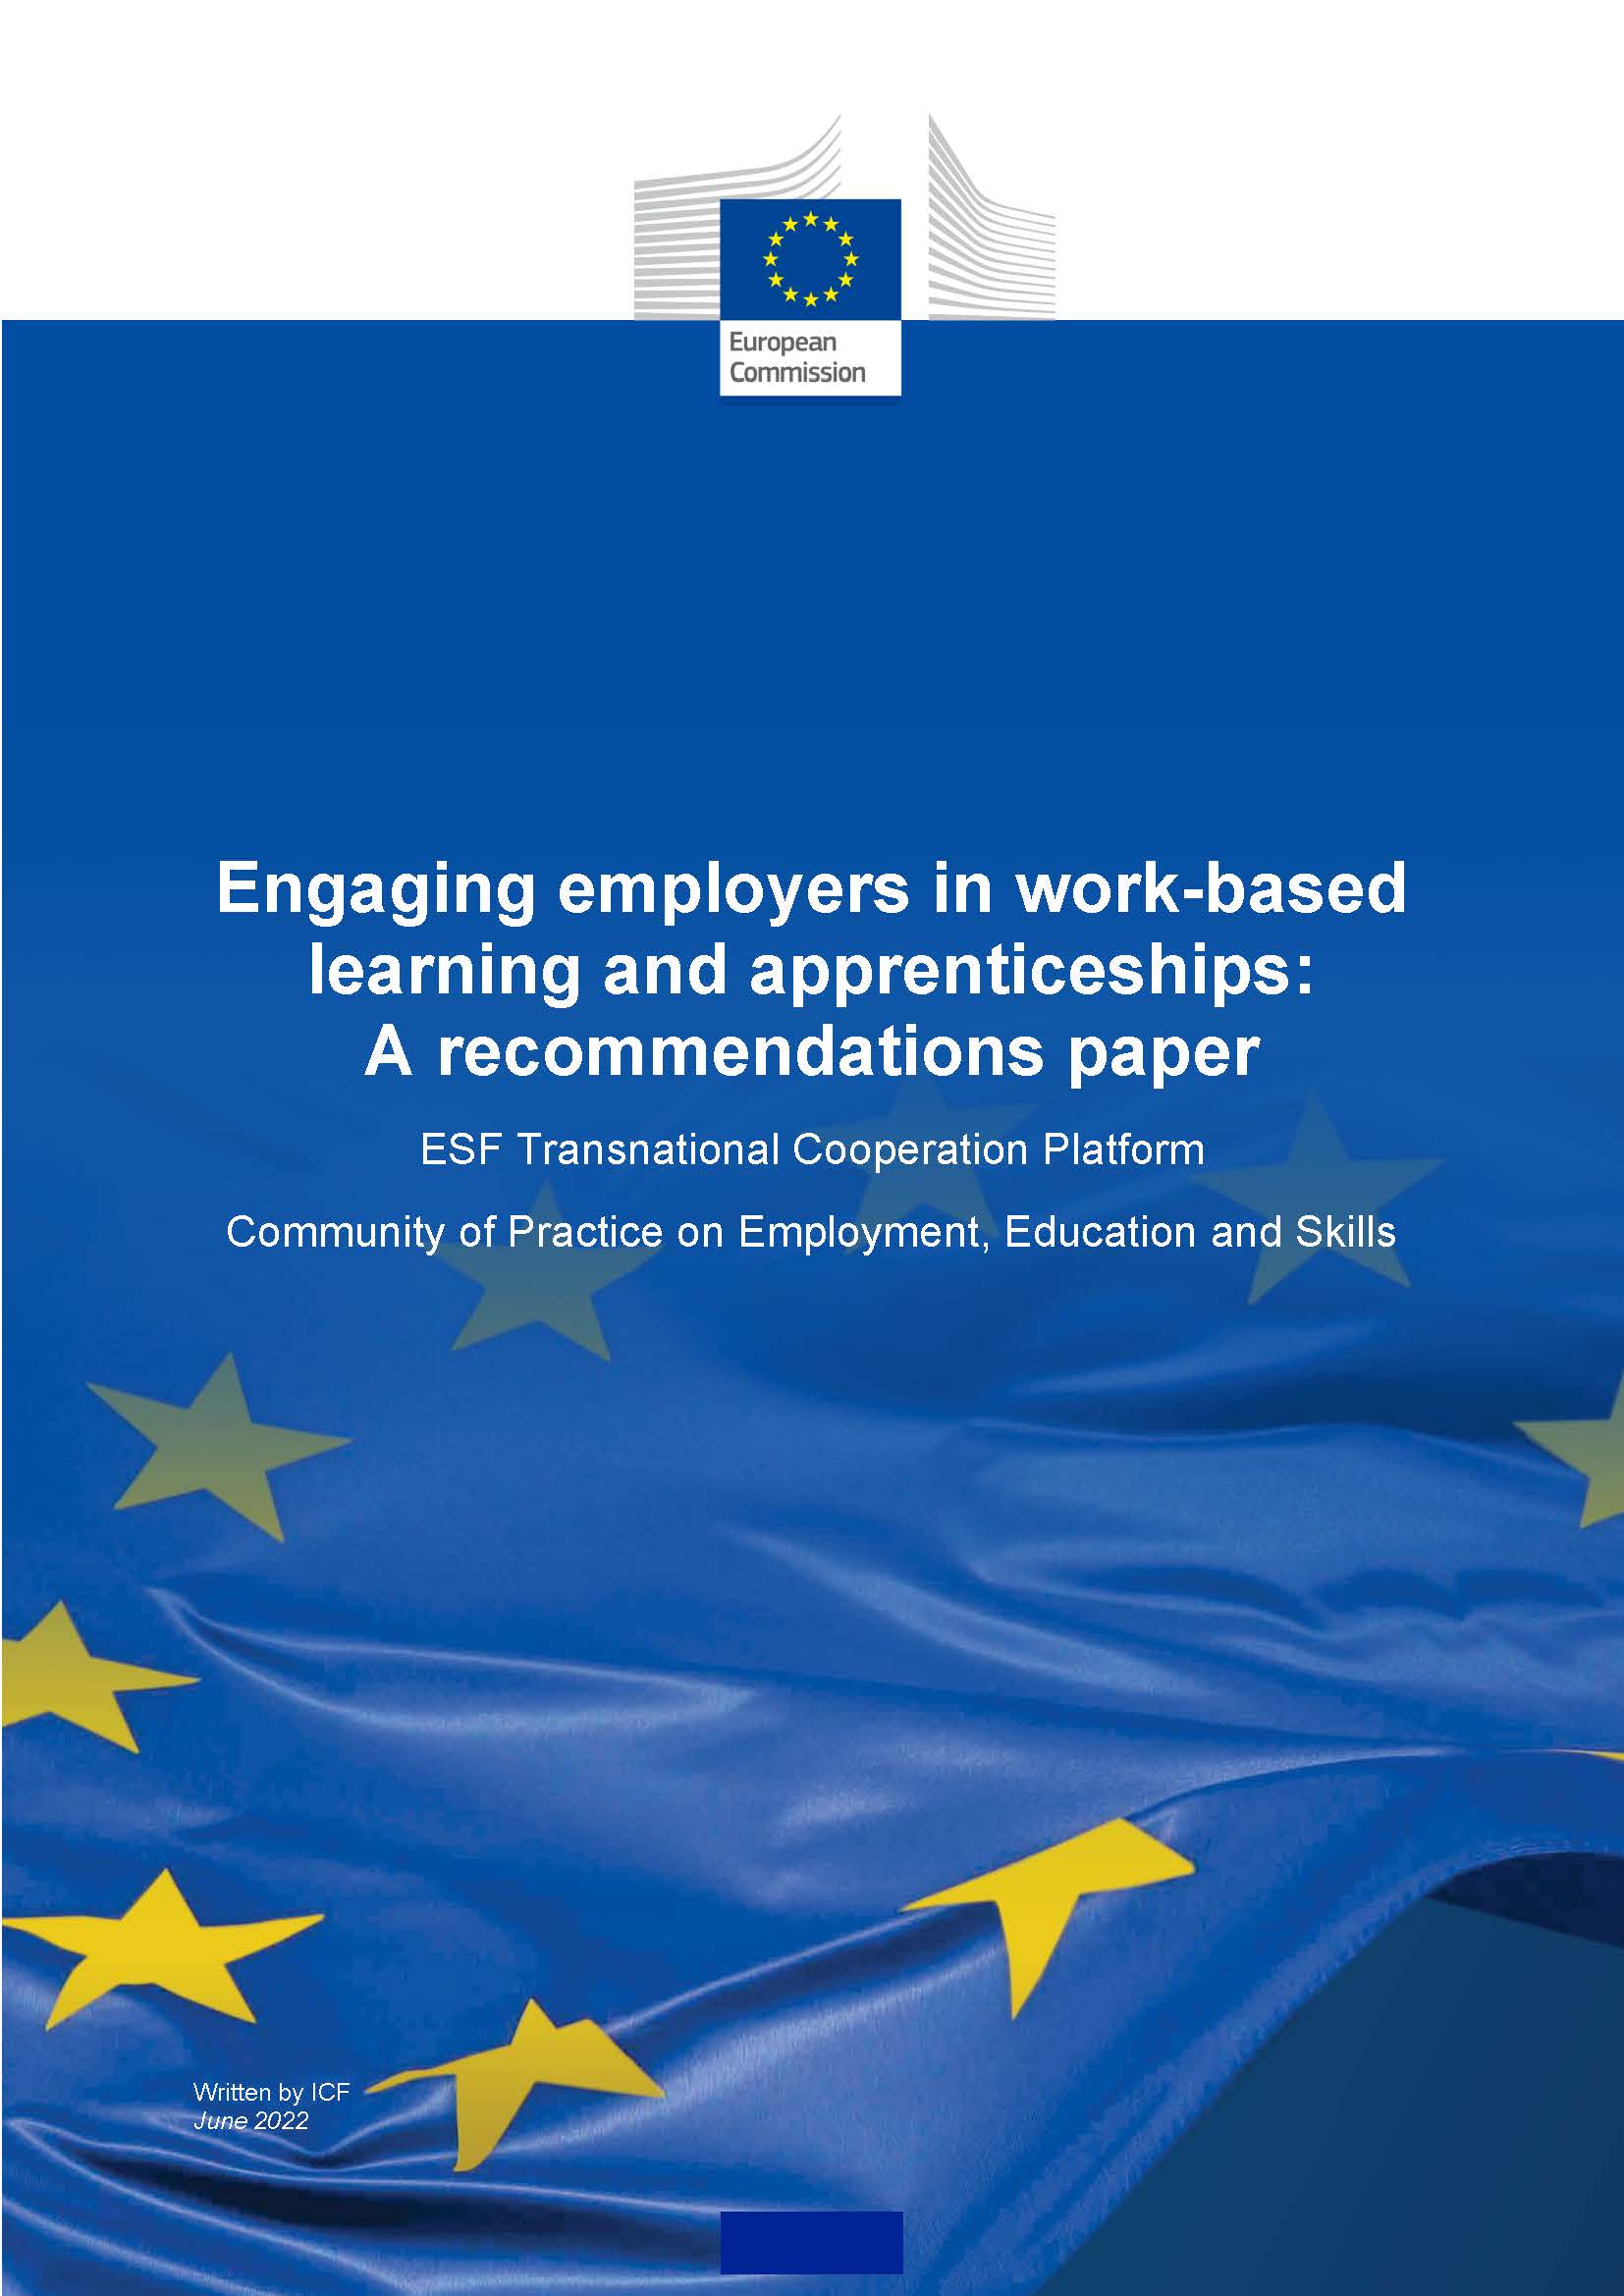 Engaging employers in work-based learning and apprenticeships: A recommendations paper